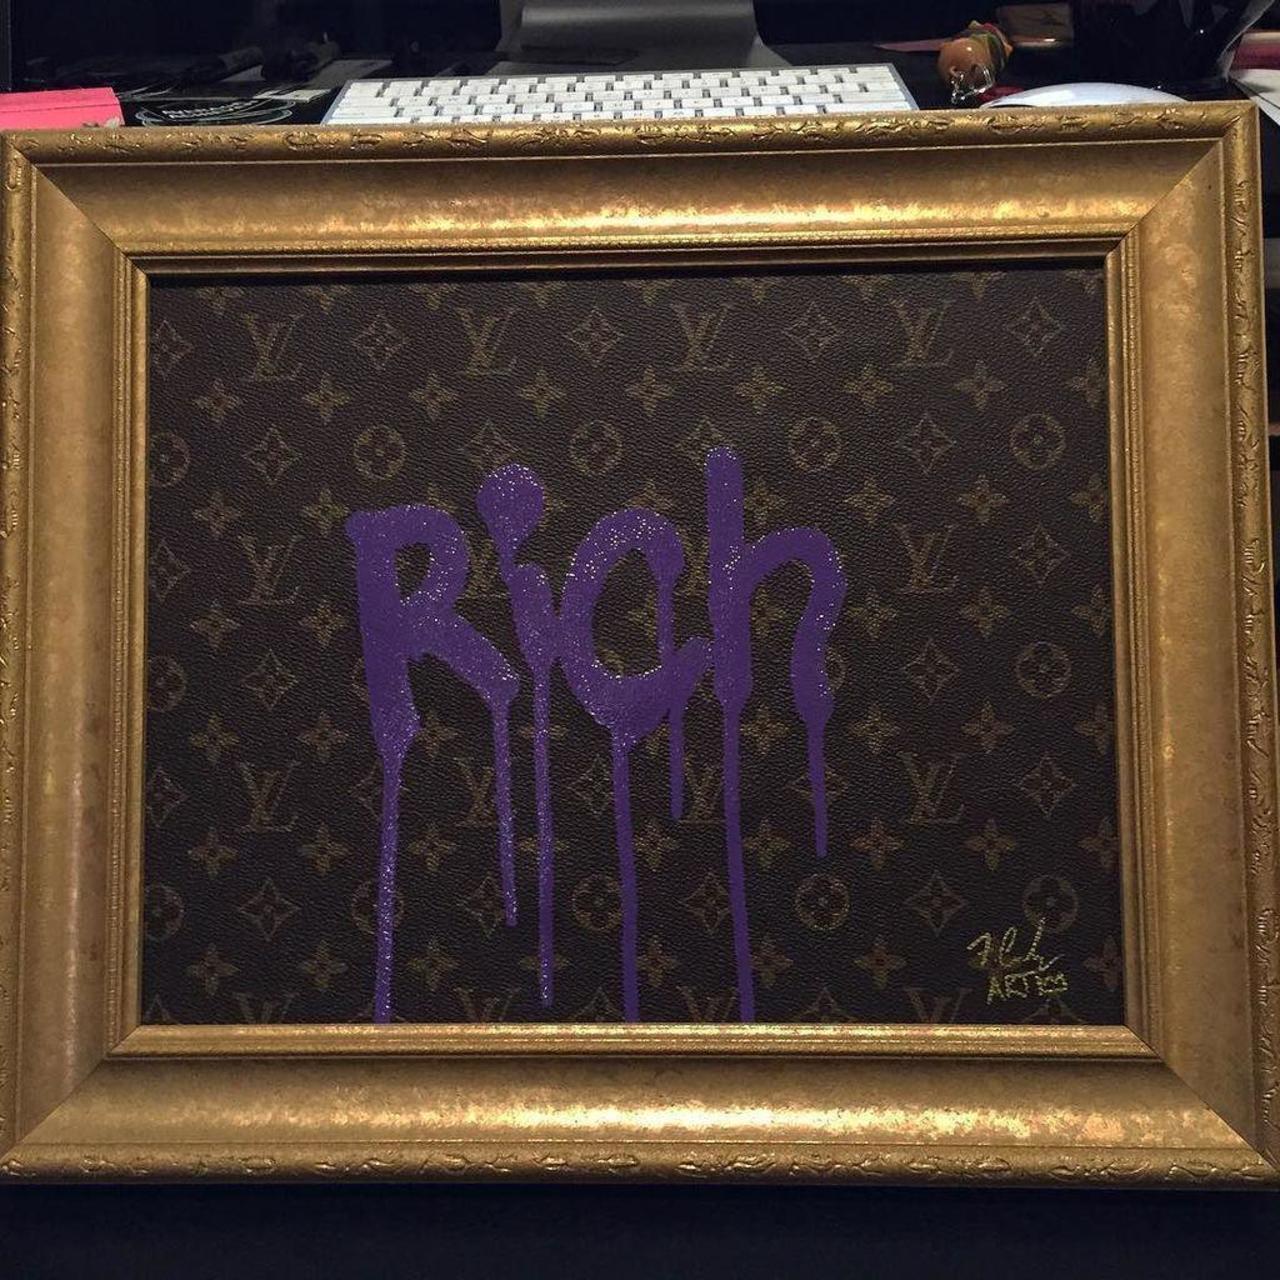  SOLD. "Rich" to the gentleman out in Los Angeles  #frasercrowley #Artlord #graffiti #streetart #streetartla #st… http://t.co/oE52I22LjM